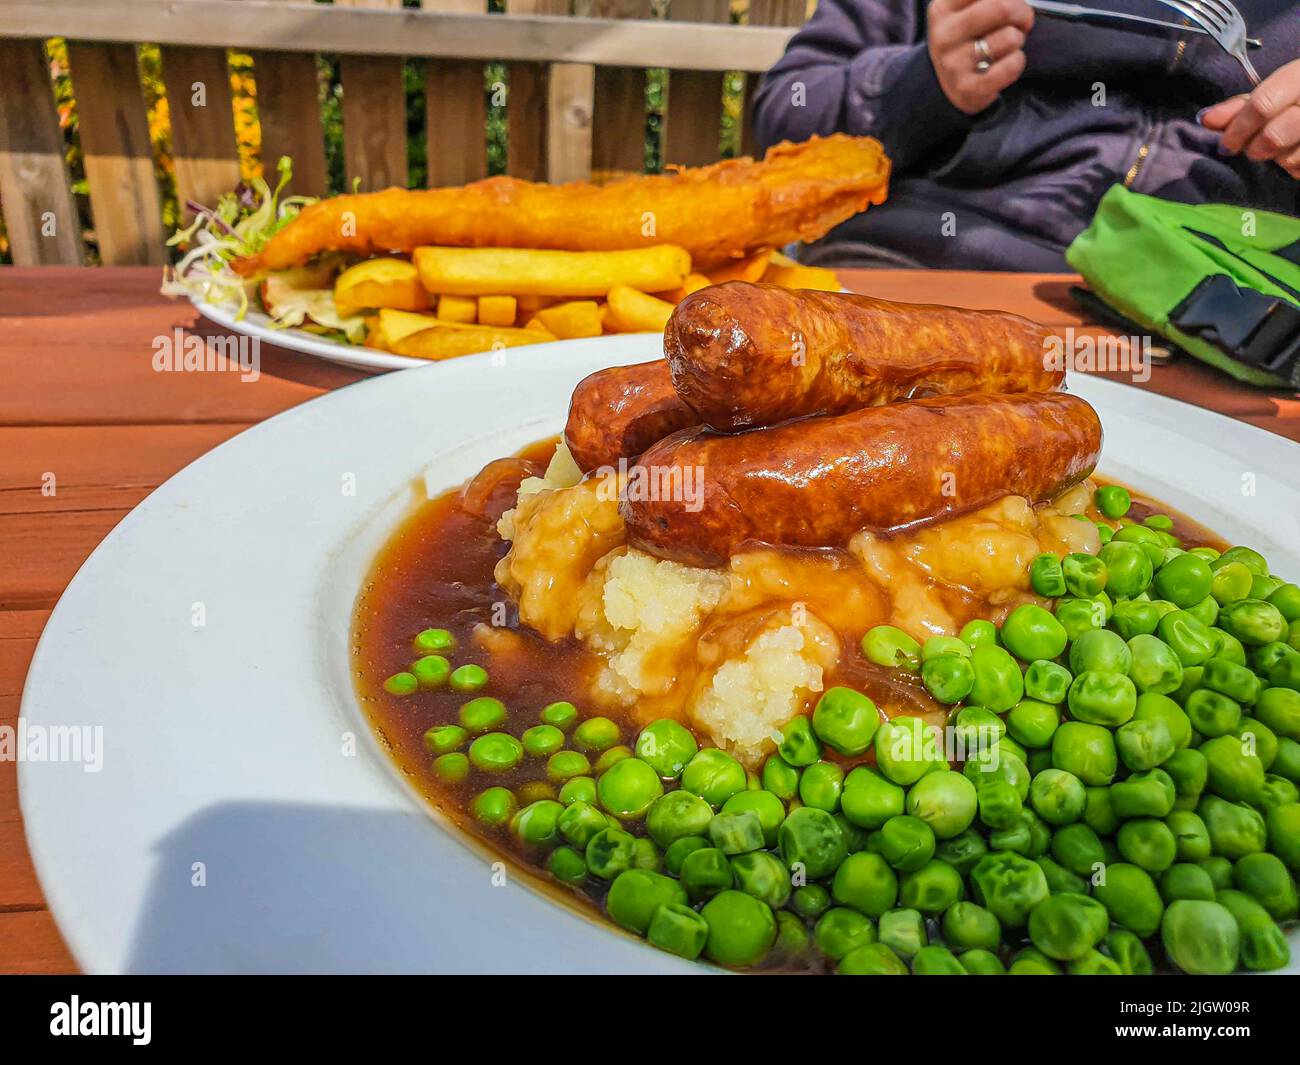 Bangers (Sausages) and Mash with Onion Gravy and peas. Fish and chips in the background at Devonshire Pub, UK Stock Photo